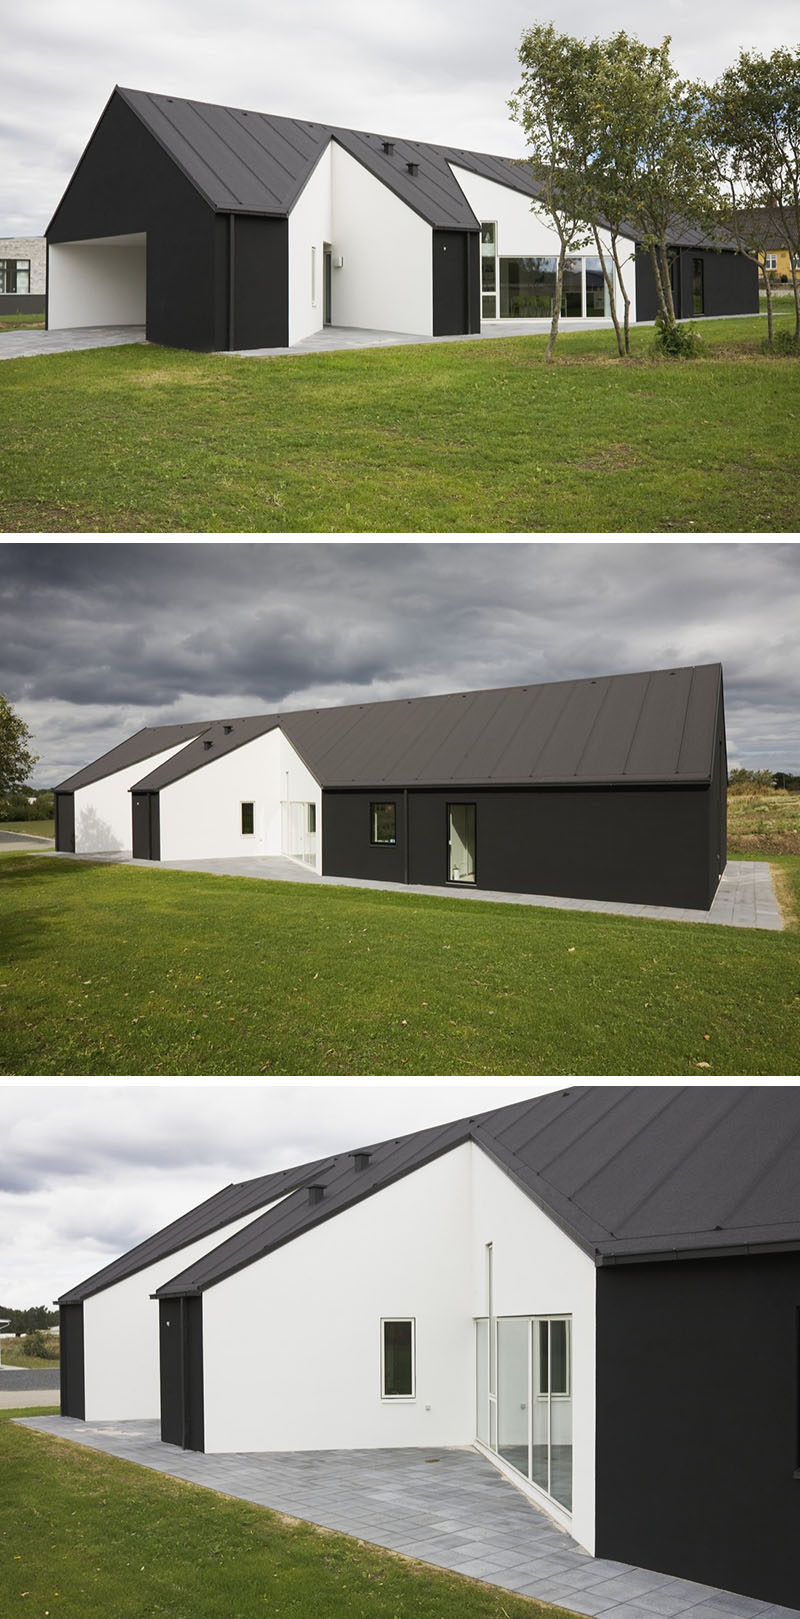 19 Examples Of Modern Scandinavian House Designs | This black house has white cut outs on its exterior to create a unique exterior design and make for a more dynamic interior layout.